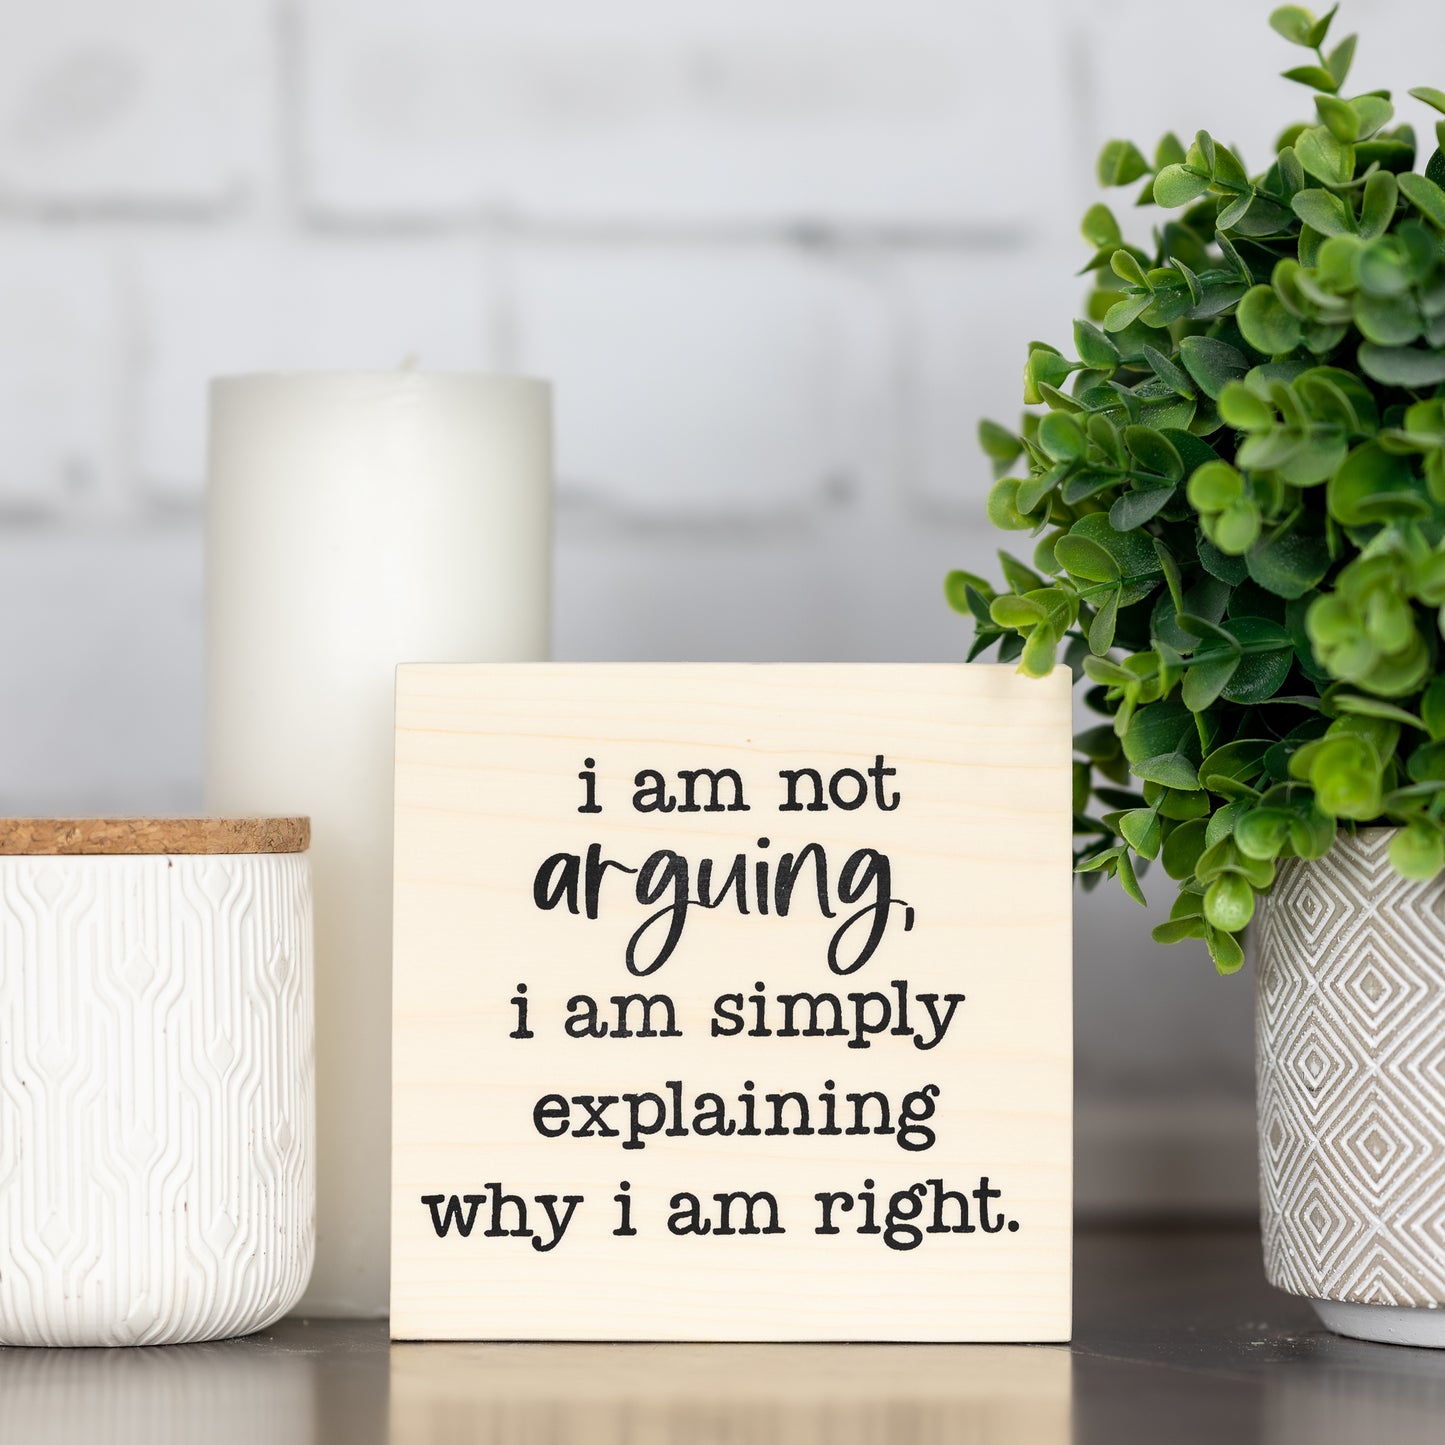 I am not arguing, I am simply explaining why I am right ~ wood block sign